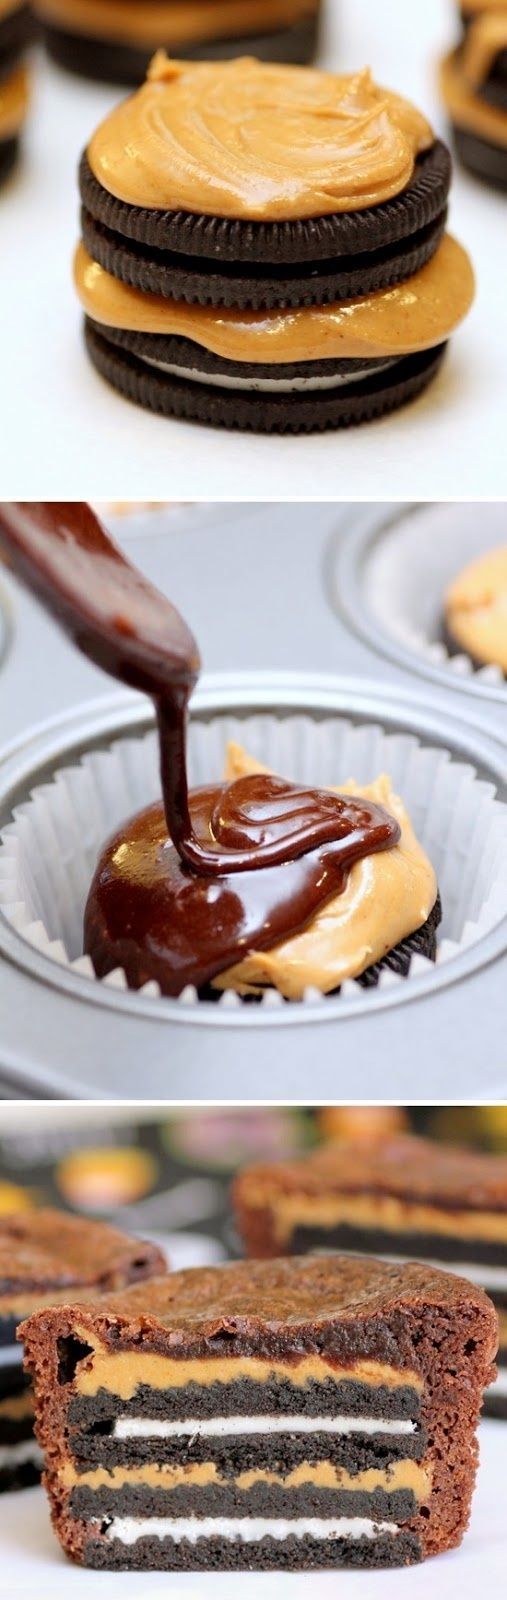 11 Delicious treats that will probably give you diabetes 011